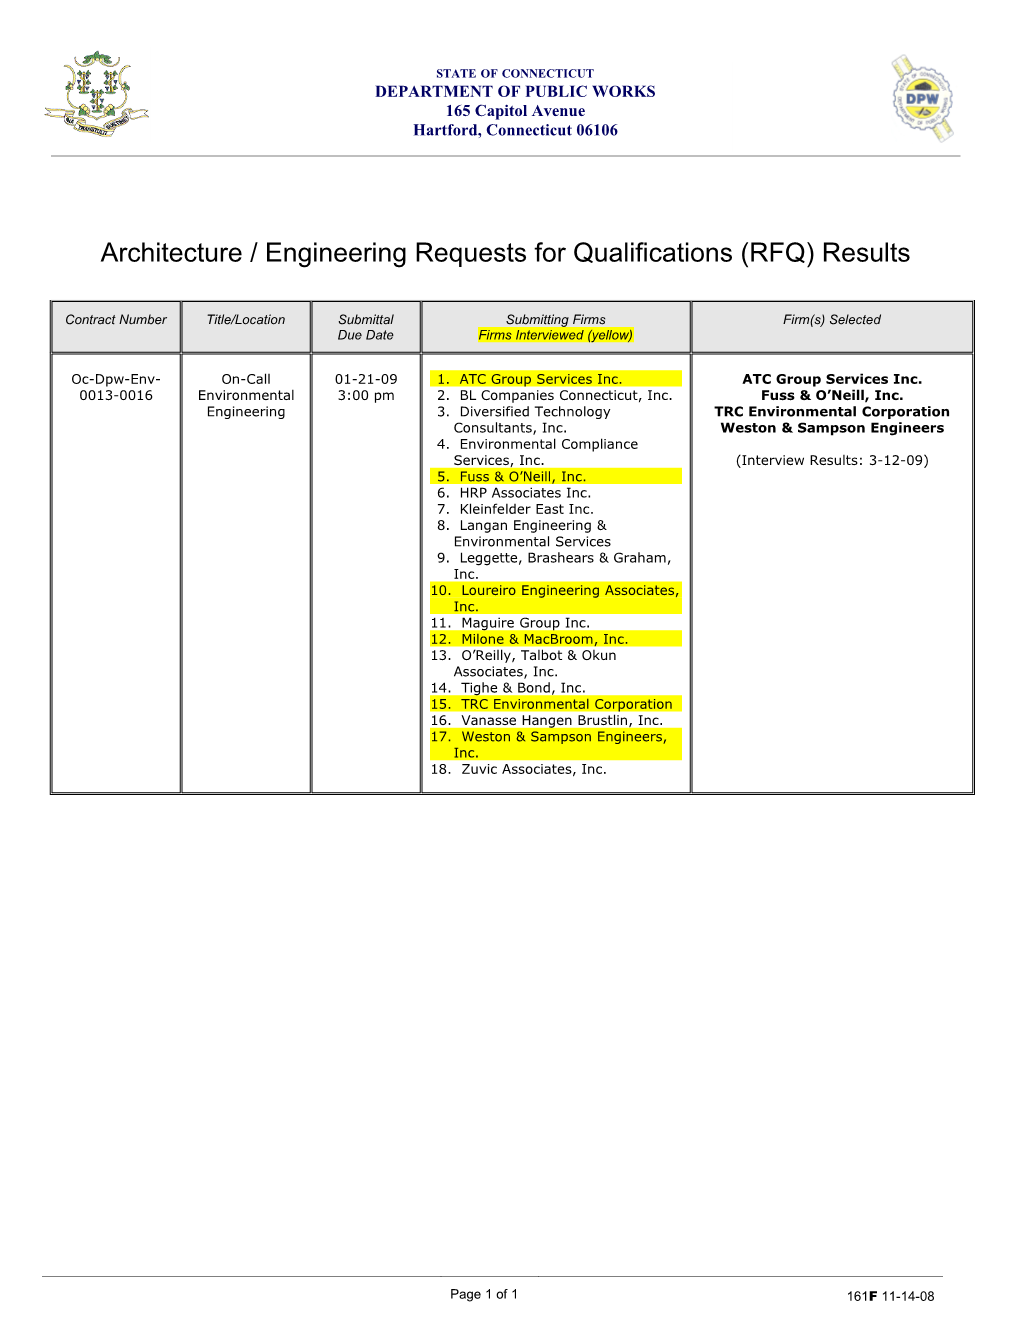 Architecture / Engineering Requests for Qualifications (RFQ) Results